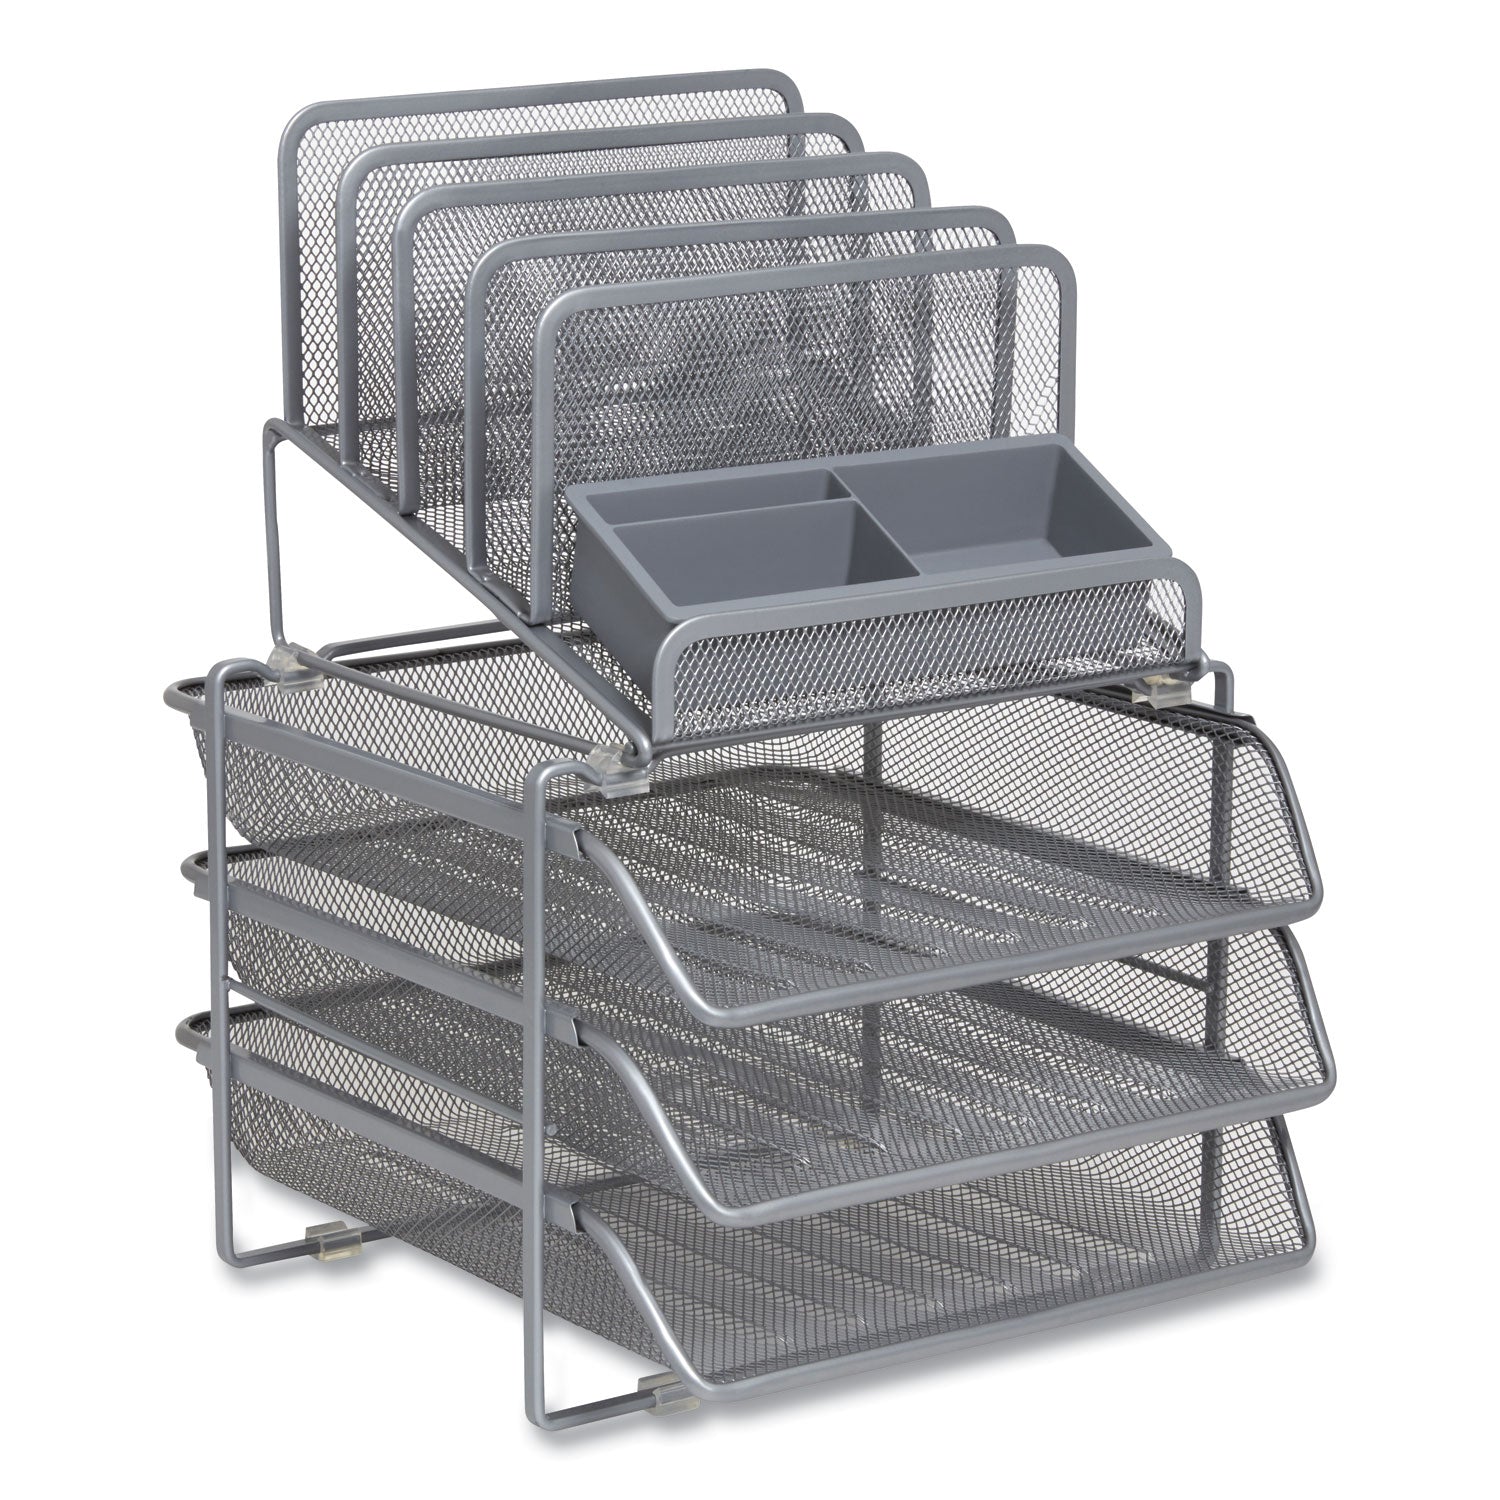 all-in-one-wire-mesh-organizer-10-sections-letter-size-1161-x-1311-x-886-silver_tud24402498 - 2